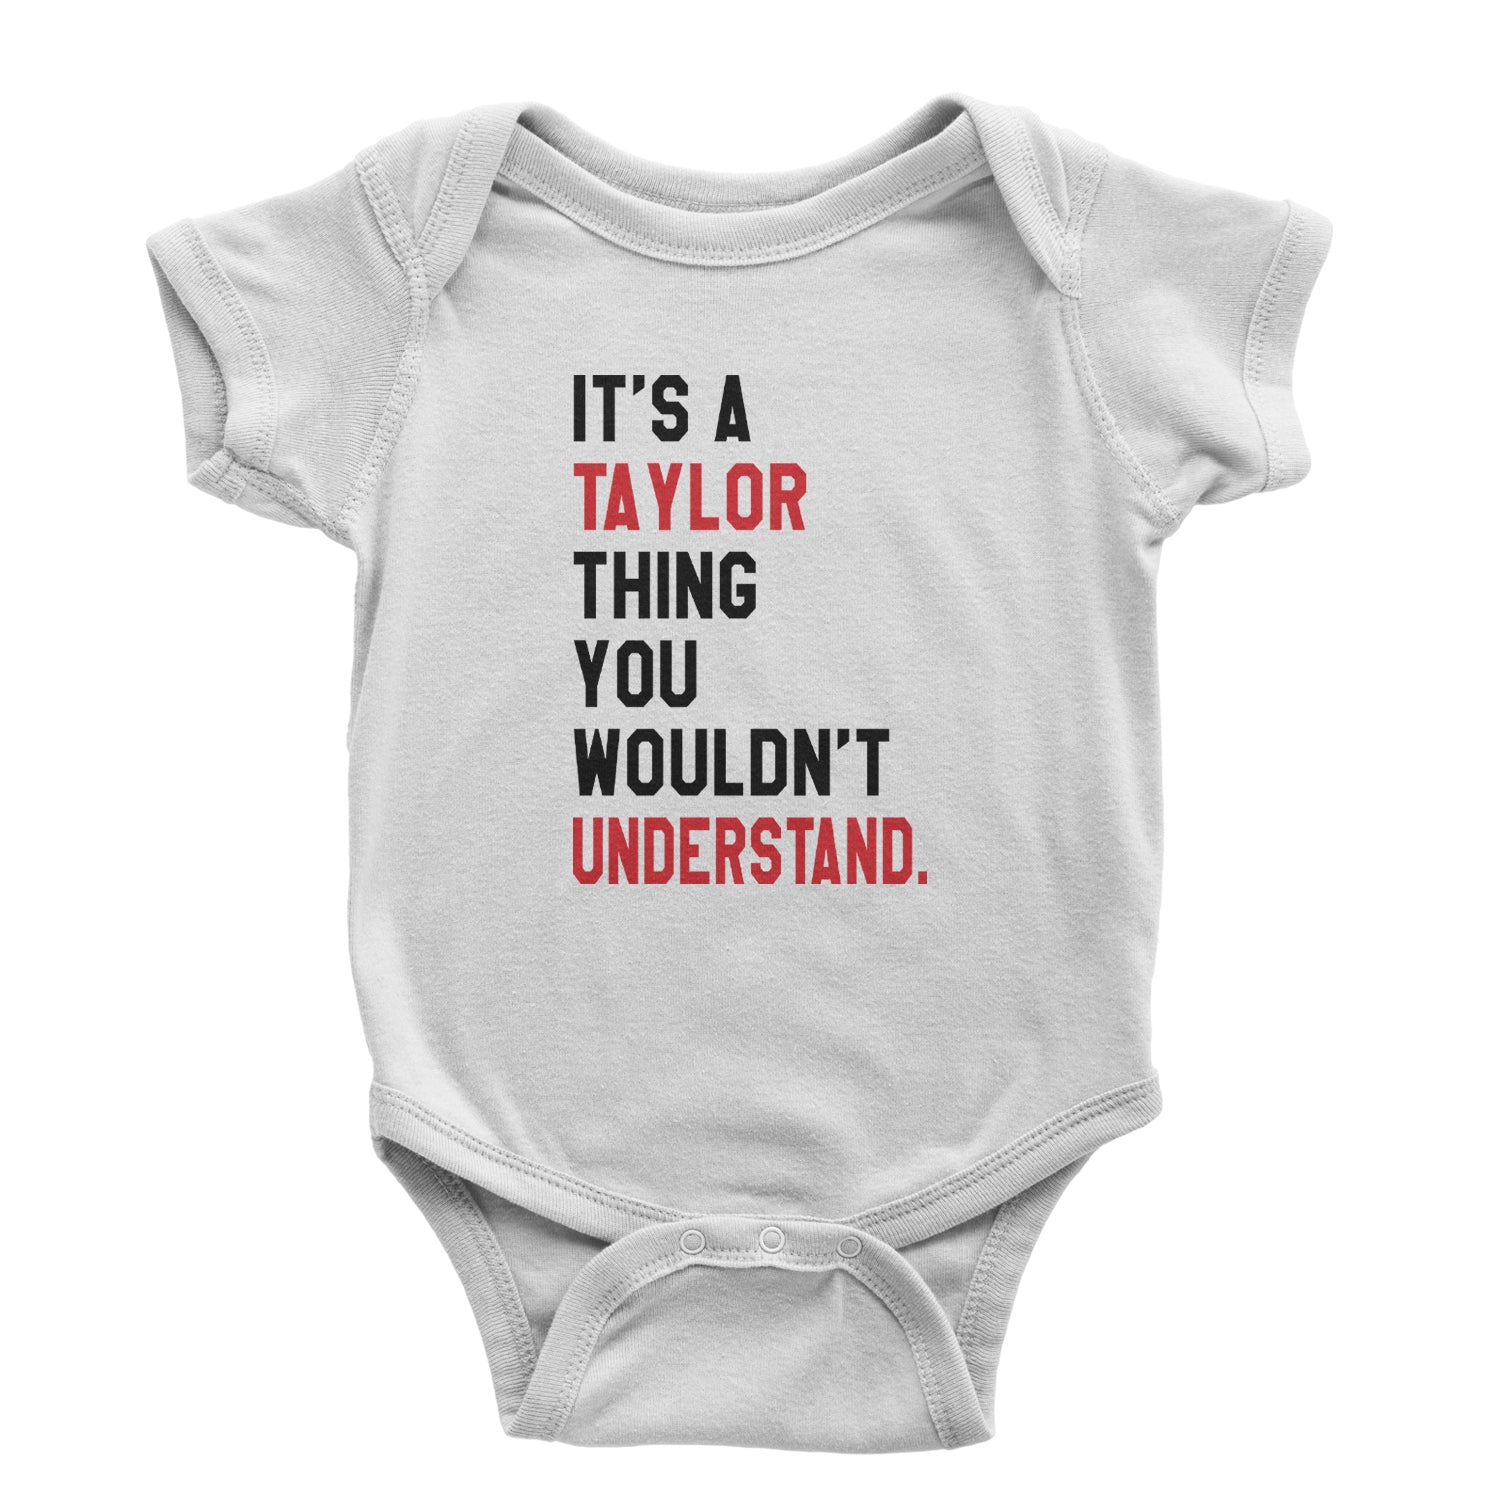 You Wouldn't Understand It's A Taylor Thing TTPD Infant One-Piece Romper Bodysuit and Toddler T-shirt